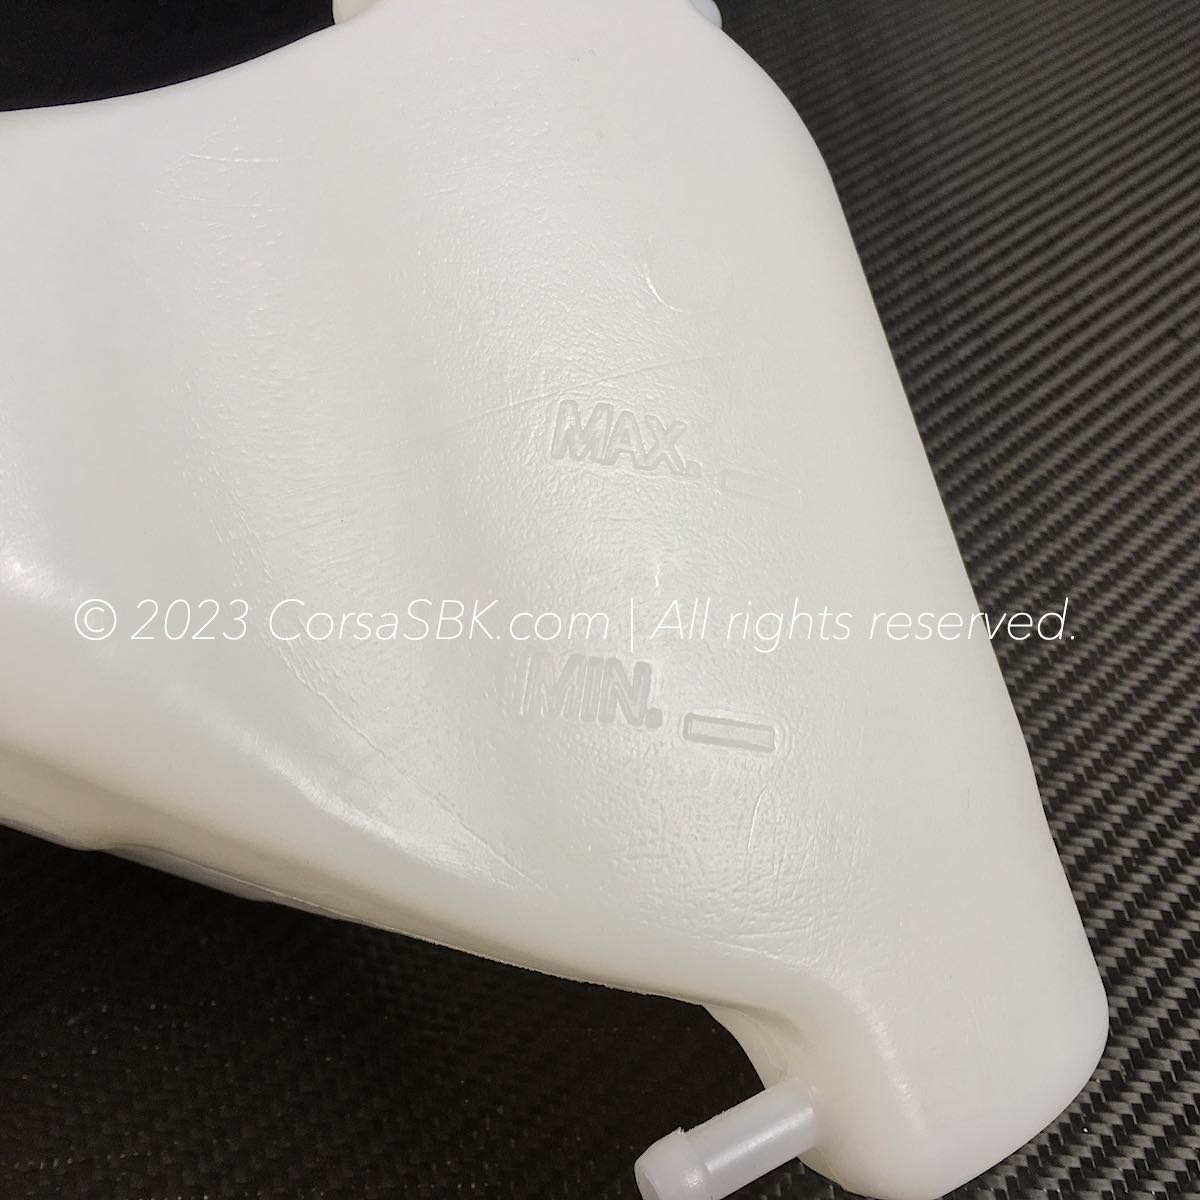 Ducati OE Multistrada 1200 water coolant expansion tank / reservoir MY  '10-'14 58510701A